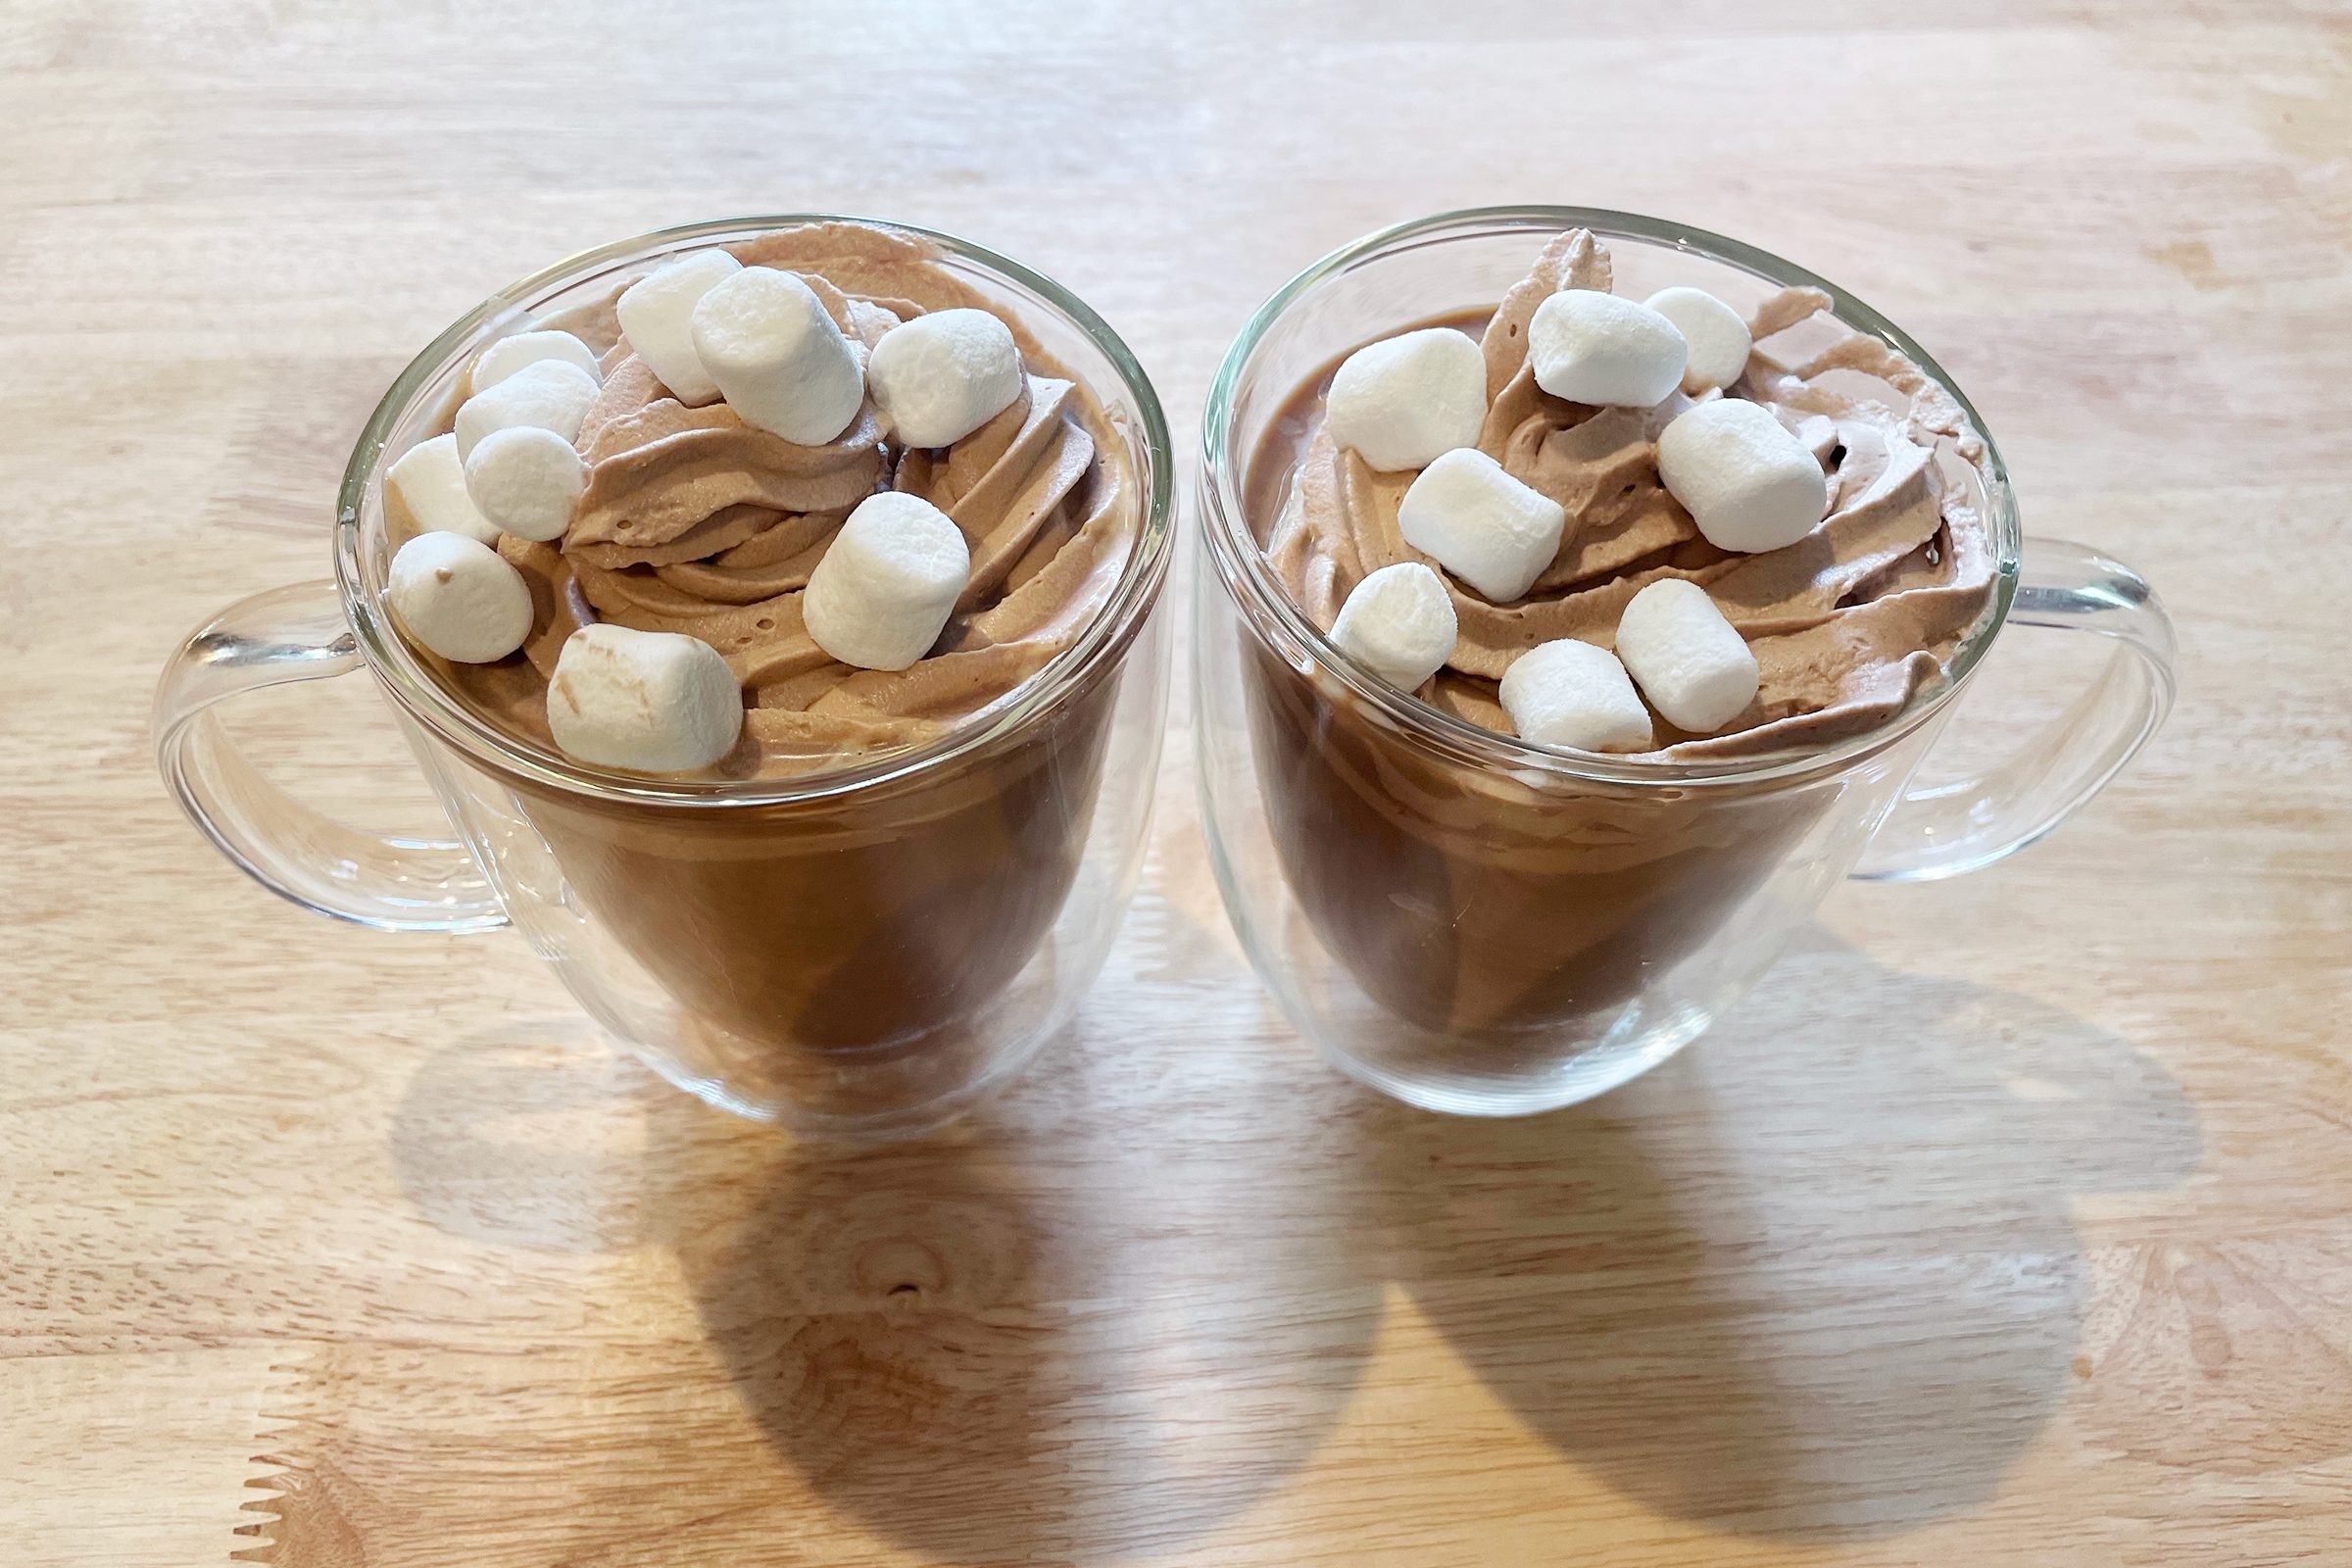 hot cocoa with marshmallows and whipped cream